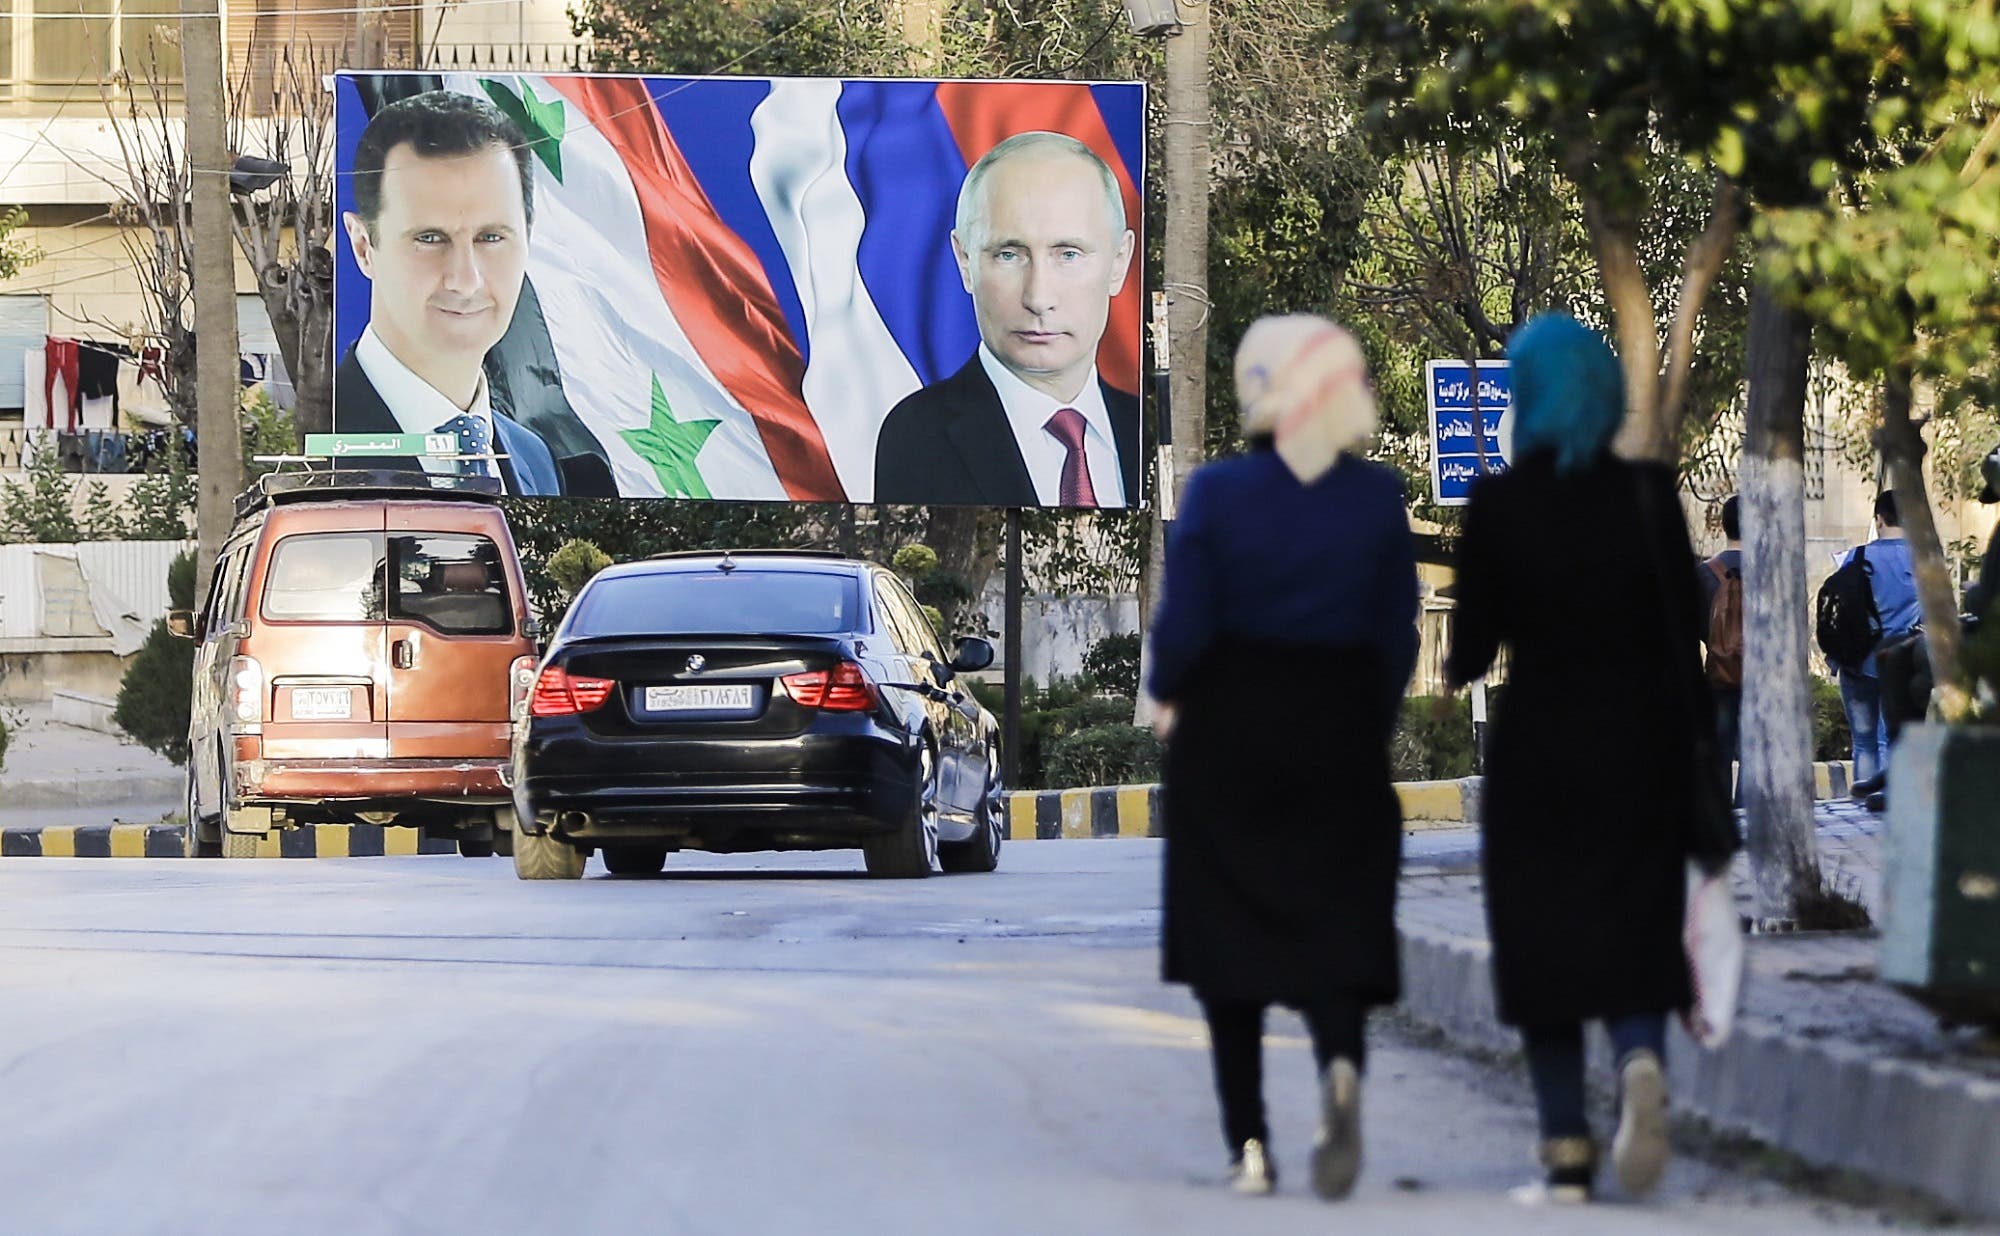 A picture taken on March 9, 2017 in Aleppo shows Syrians walking past a giant poster of Bashar al-Assad and Vladimir Putin. (AFP)